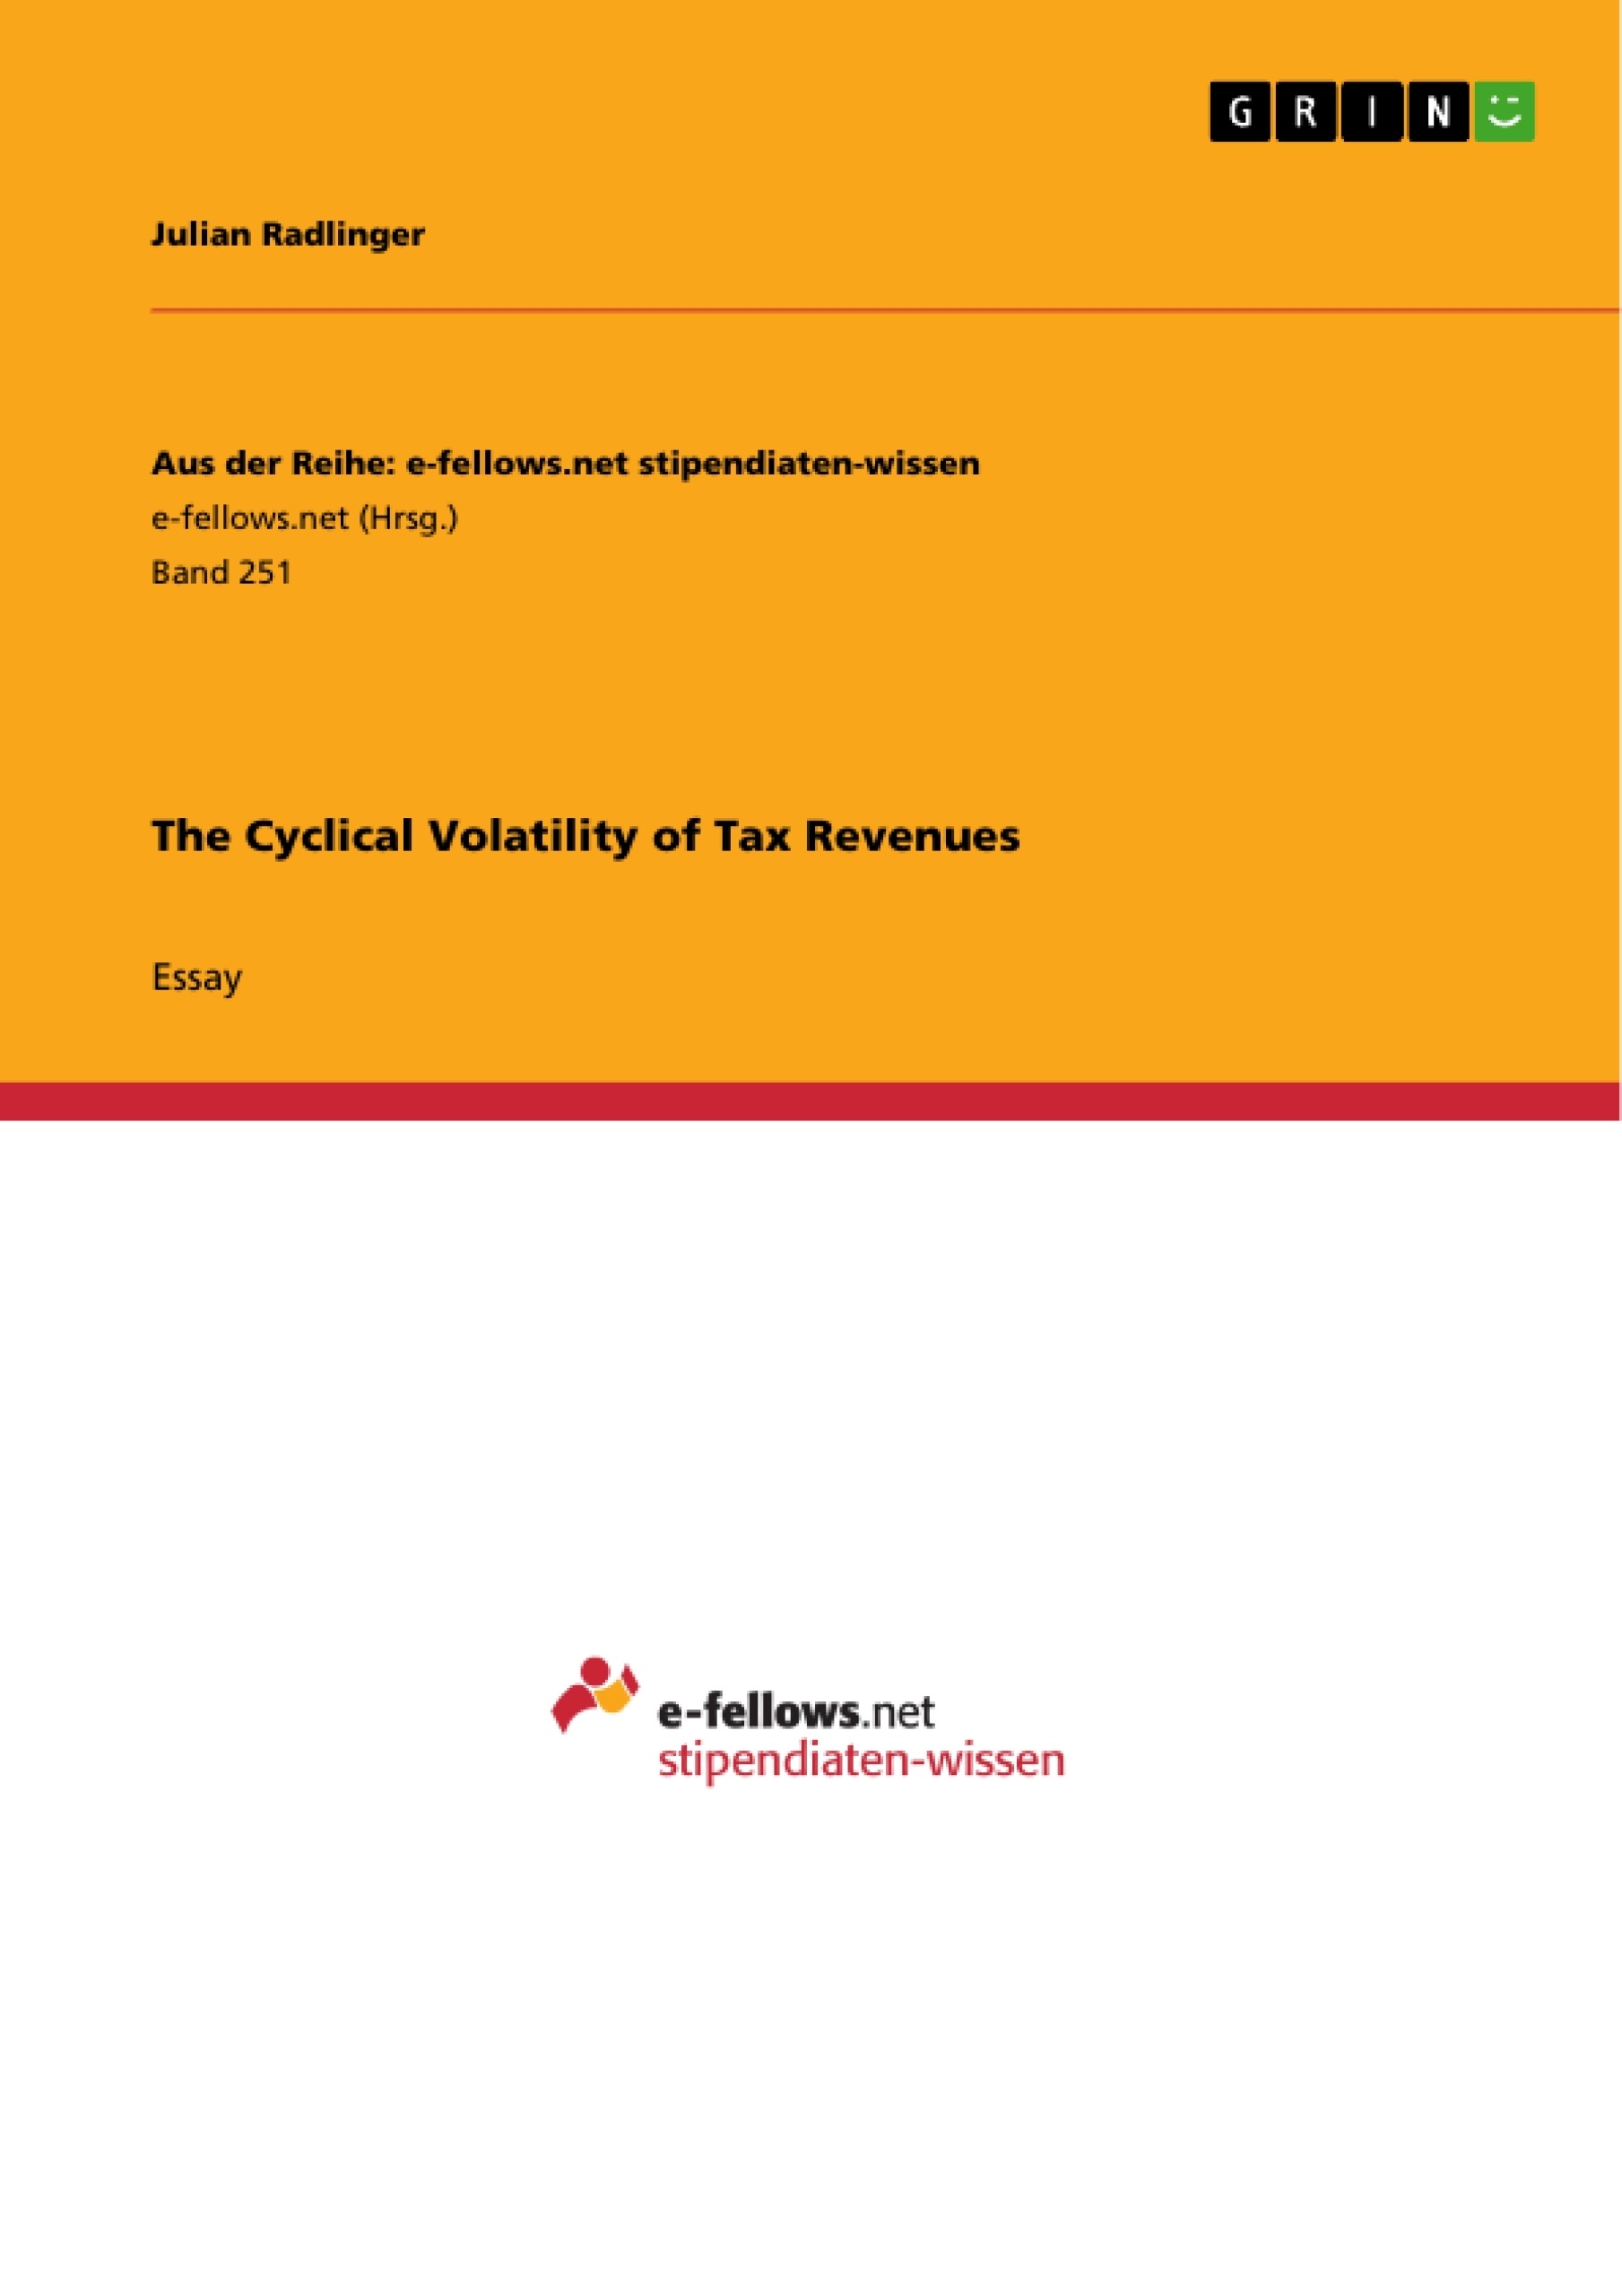 Title: The Cyclical Volatility of Tax Revenues 